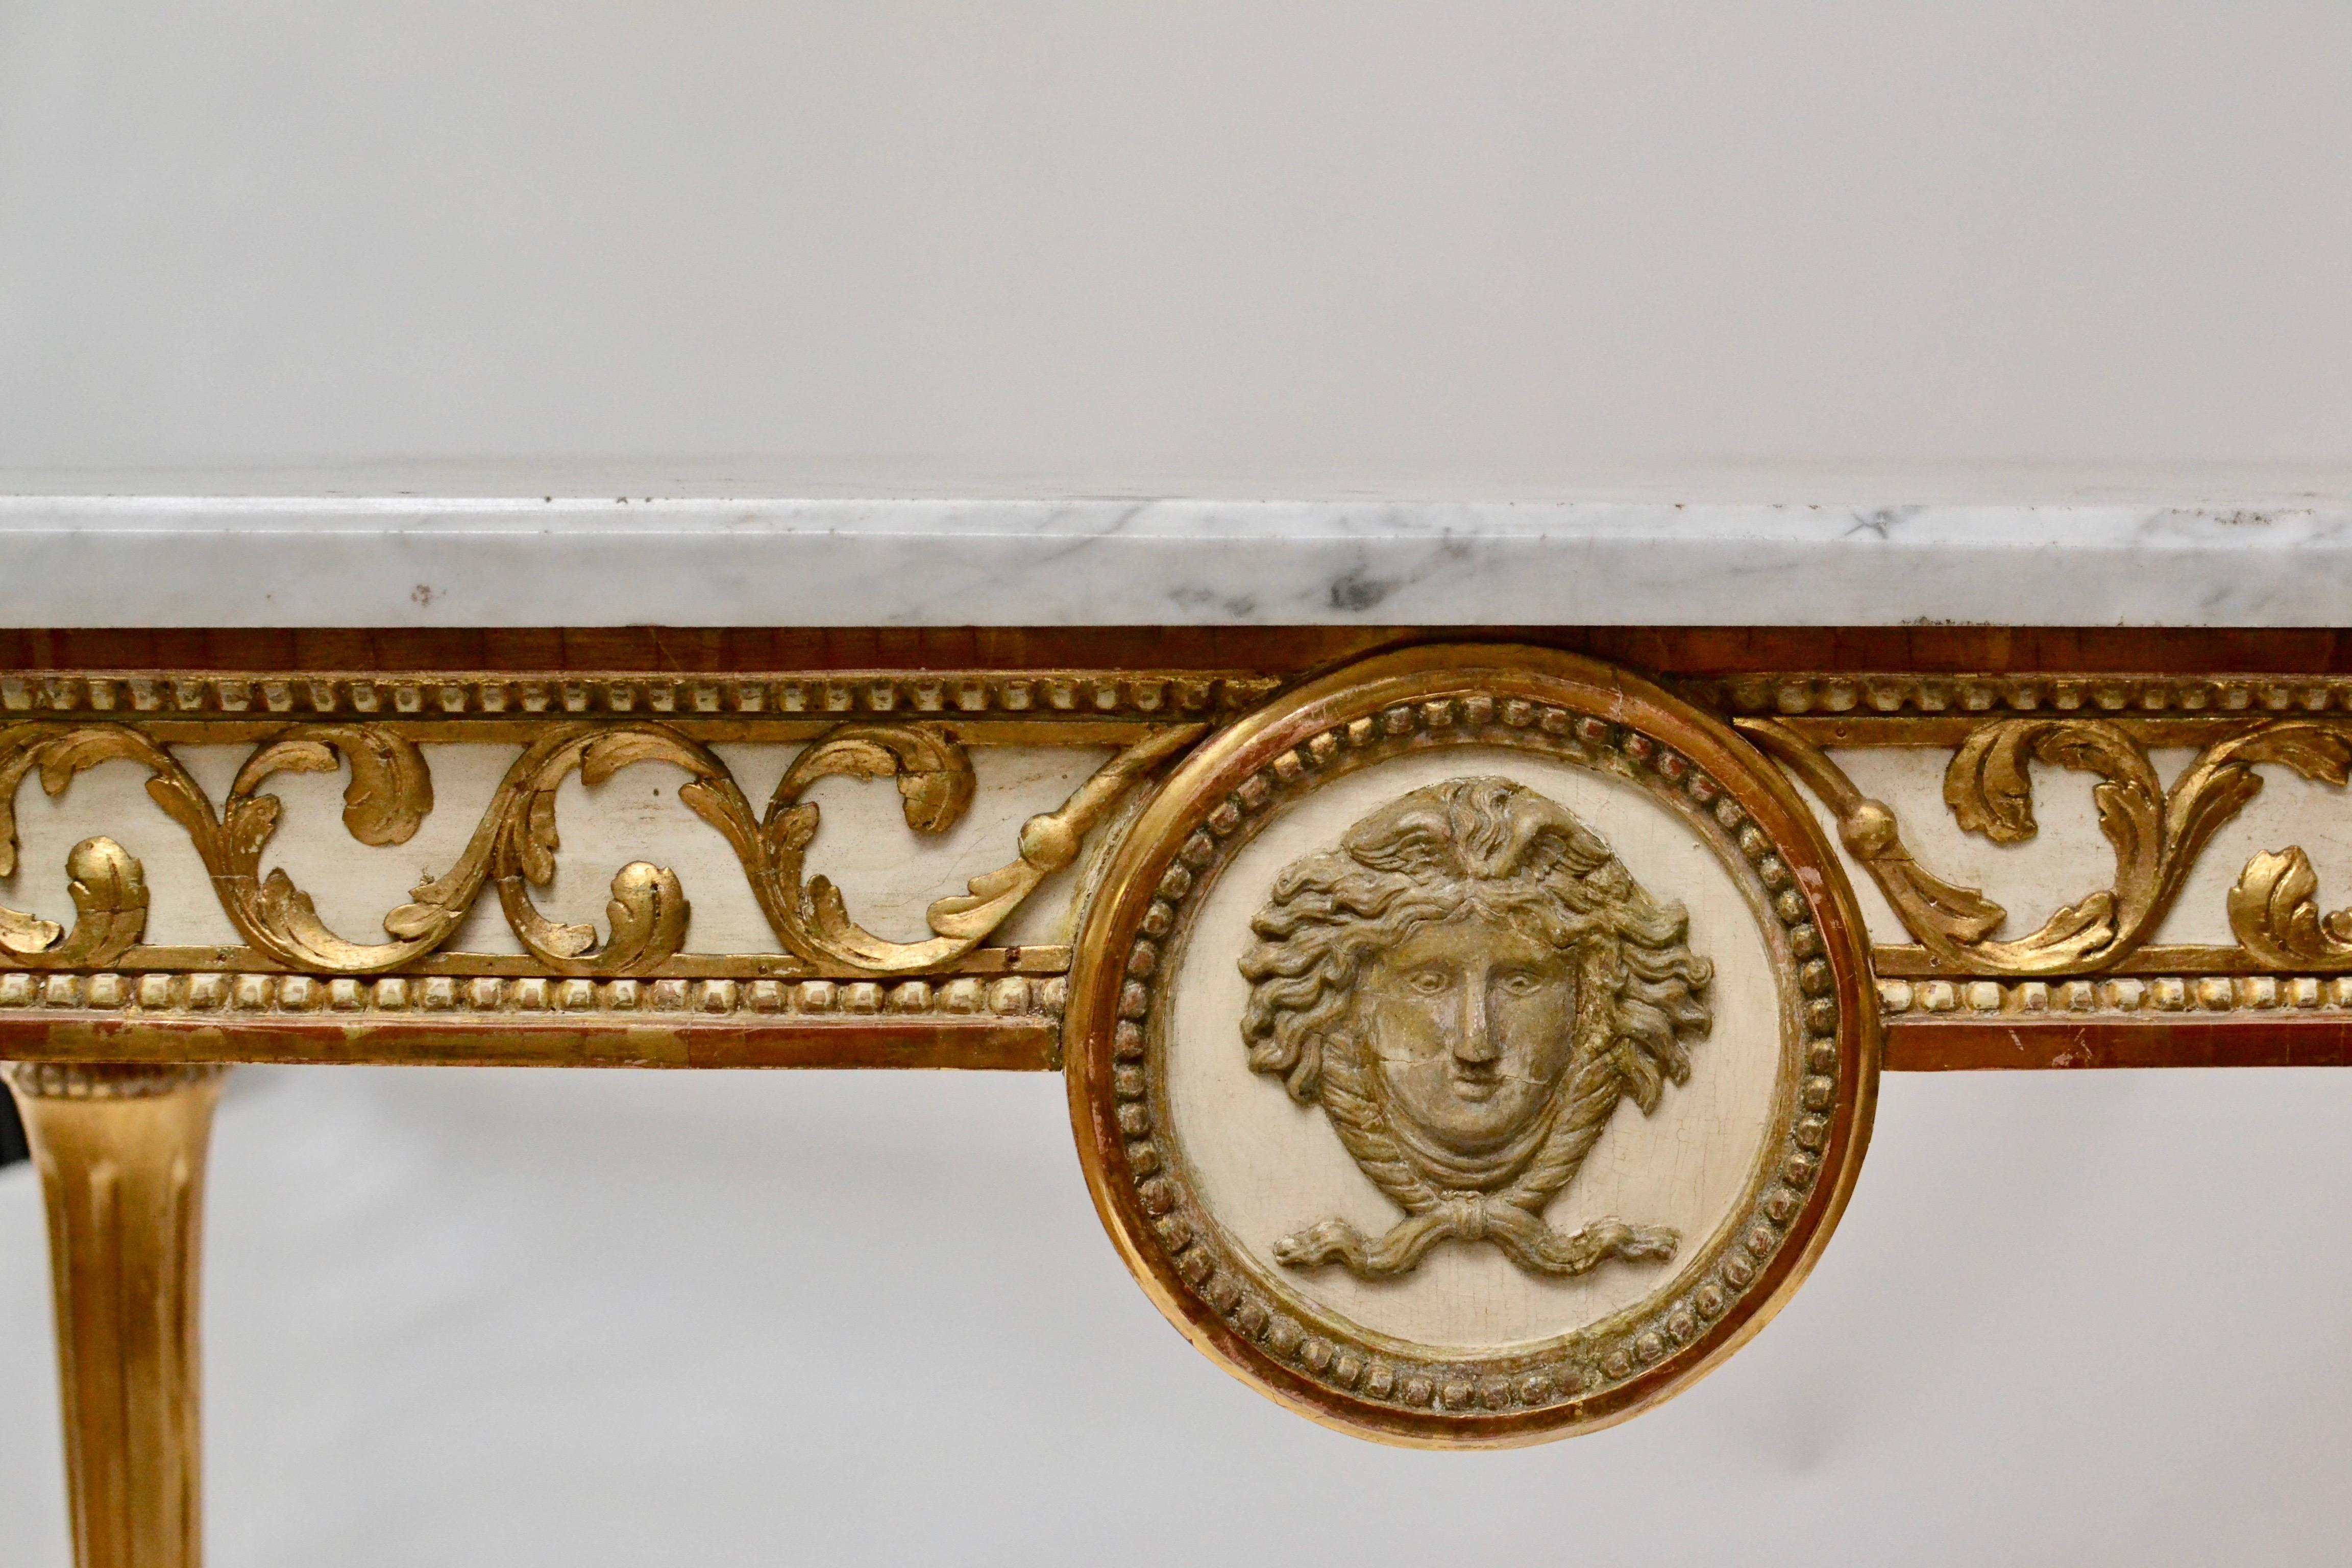 Carrara Marble Swedish Gustavian Giltwood Console Table, Marble Top, 18th Century